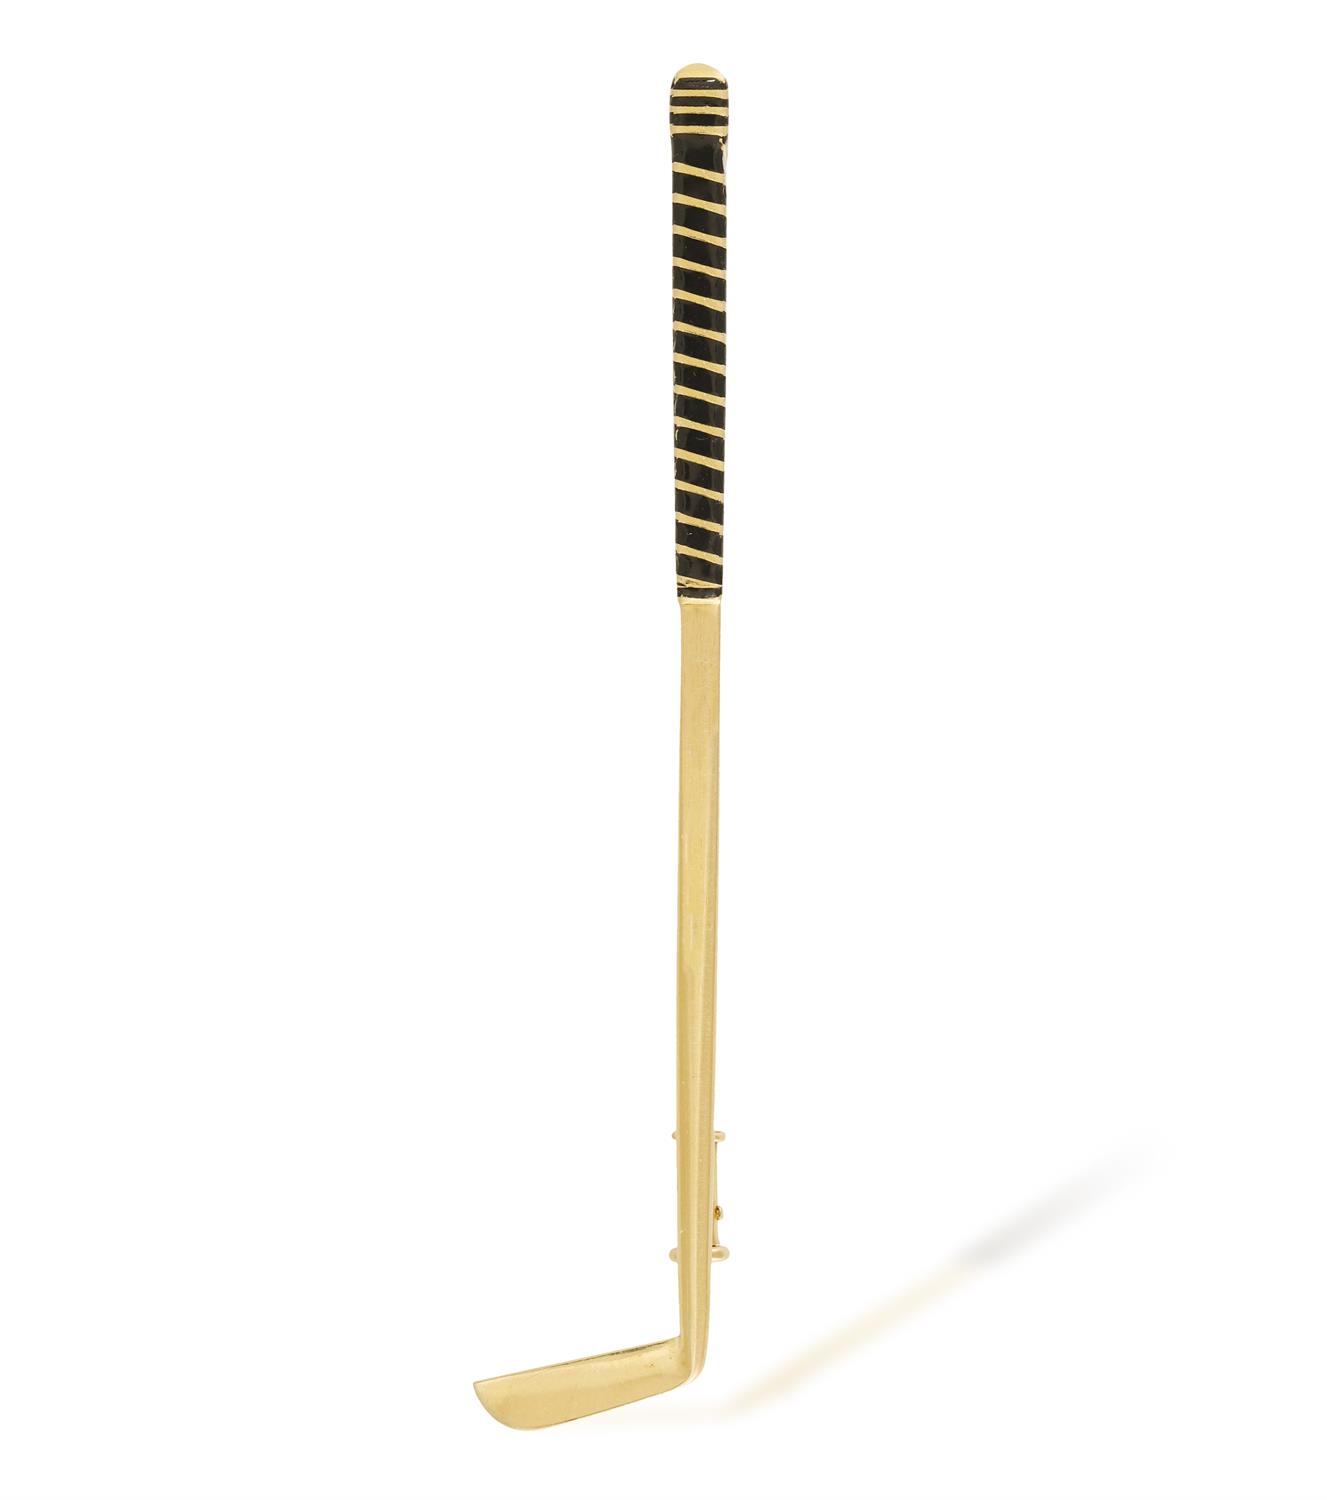 AN ENAMEL NOVELTY BROOCH, BY CARTIER, CIRCA 1935 Designed as a golf club, decorated with black